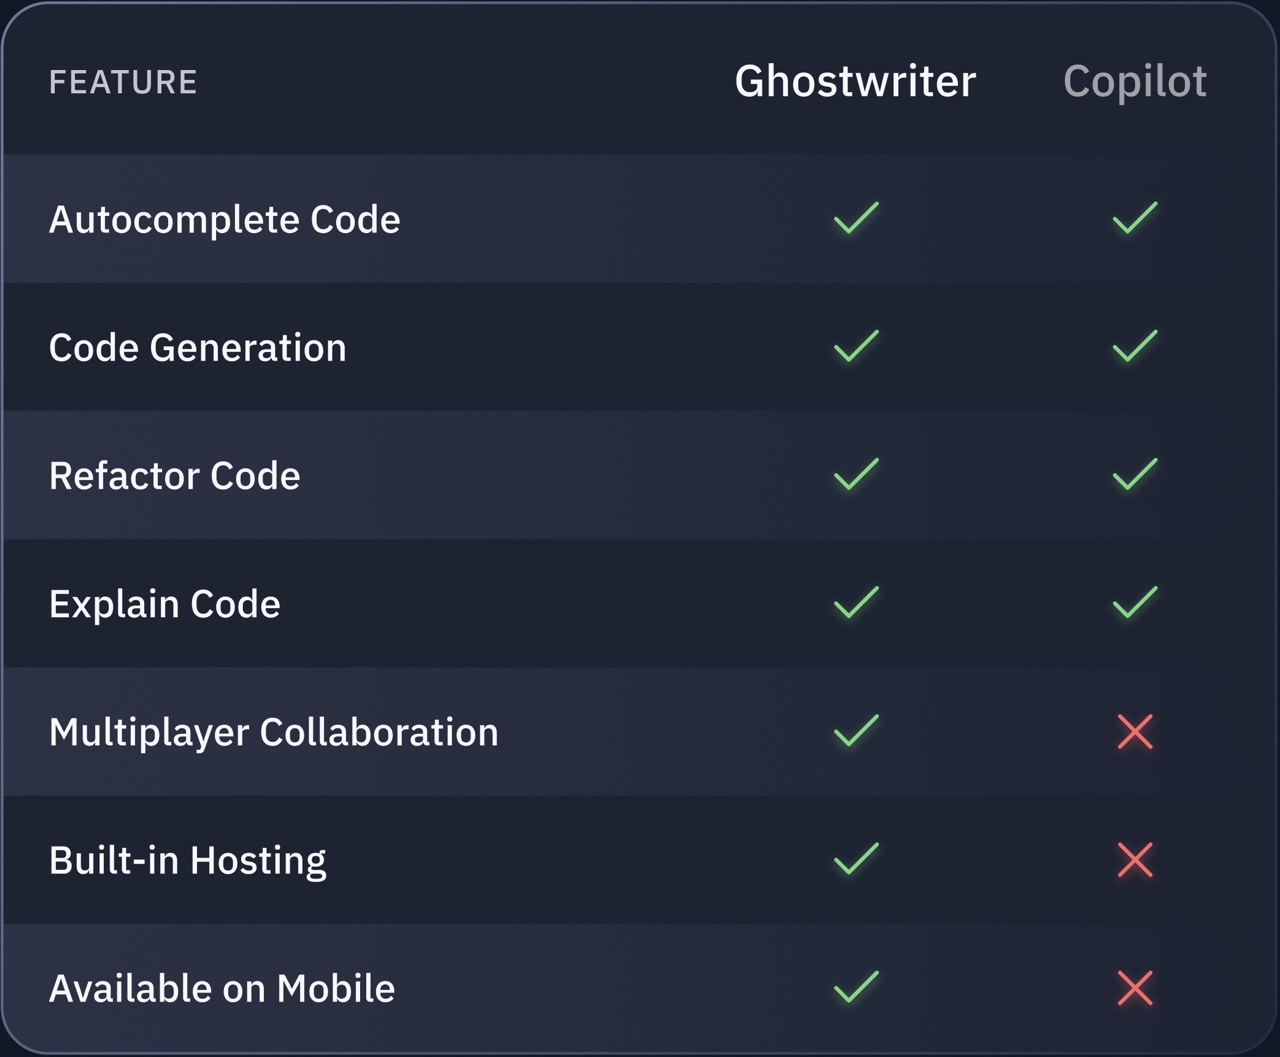 comparing ghostwriter to github copilot